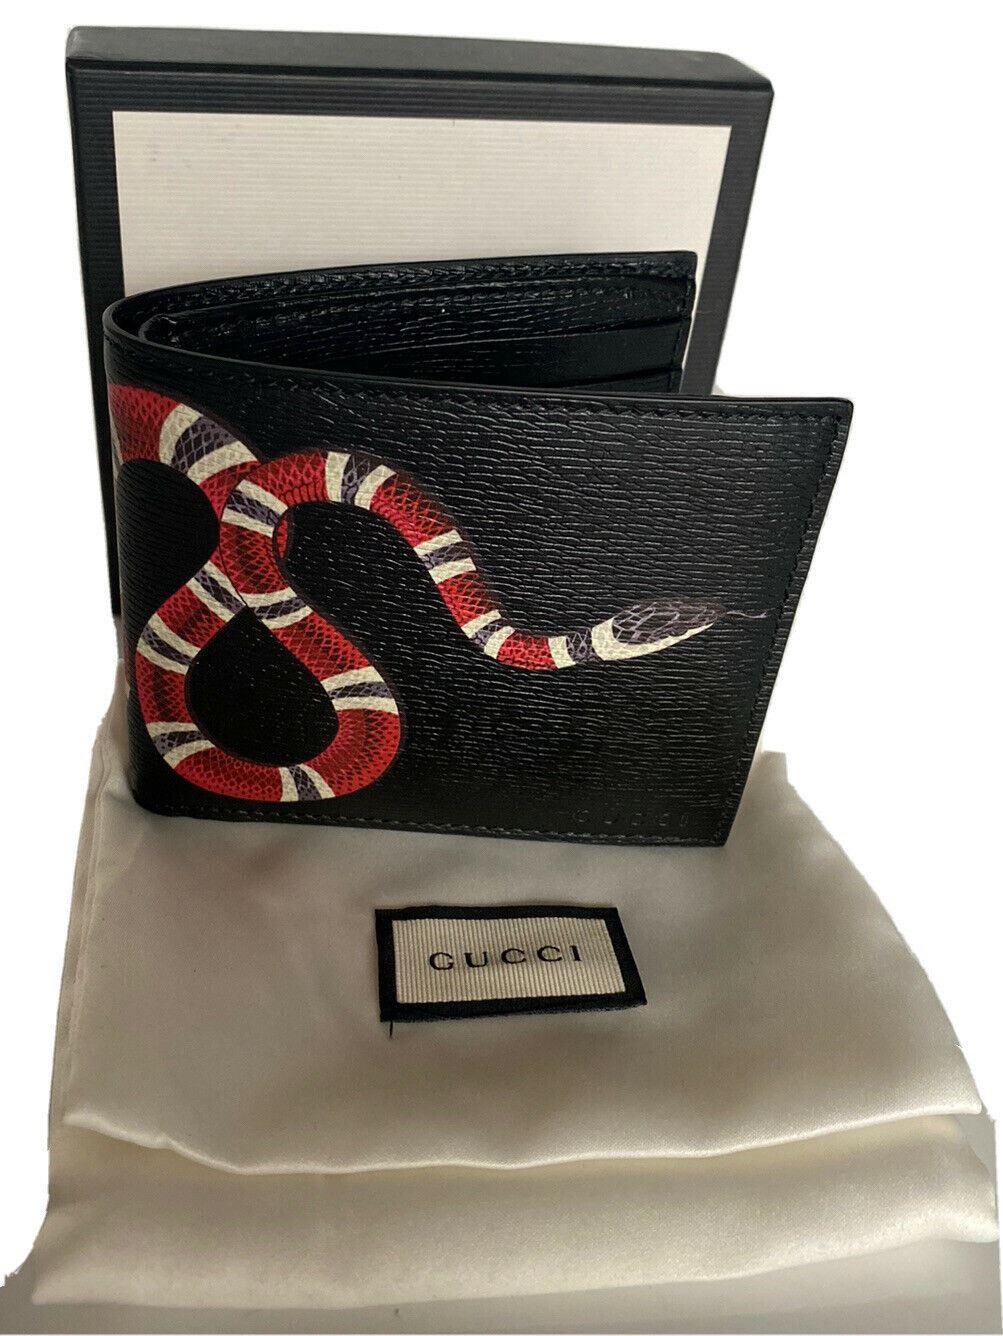 New Gucci GG Kingsnake Print Bifold Leather Black Wallet Made in Italy 451268